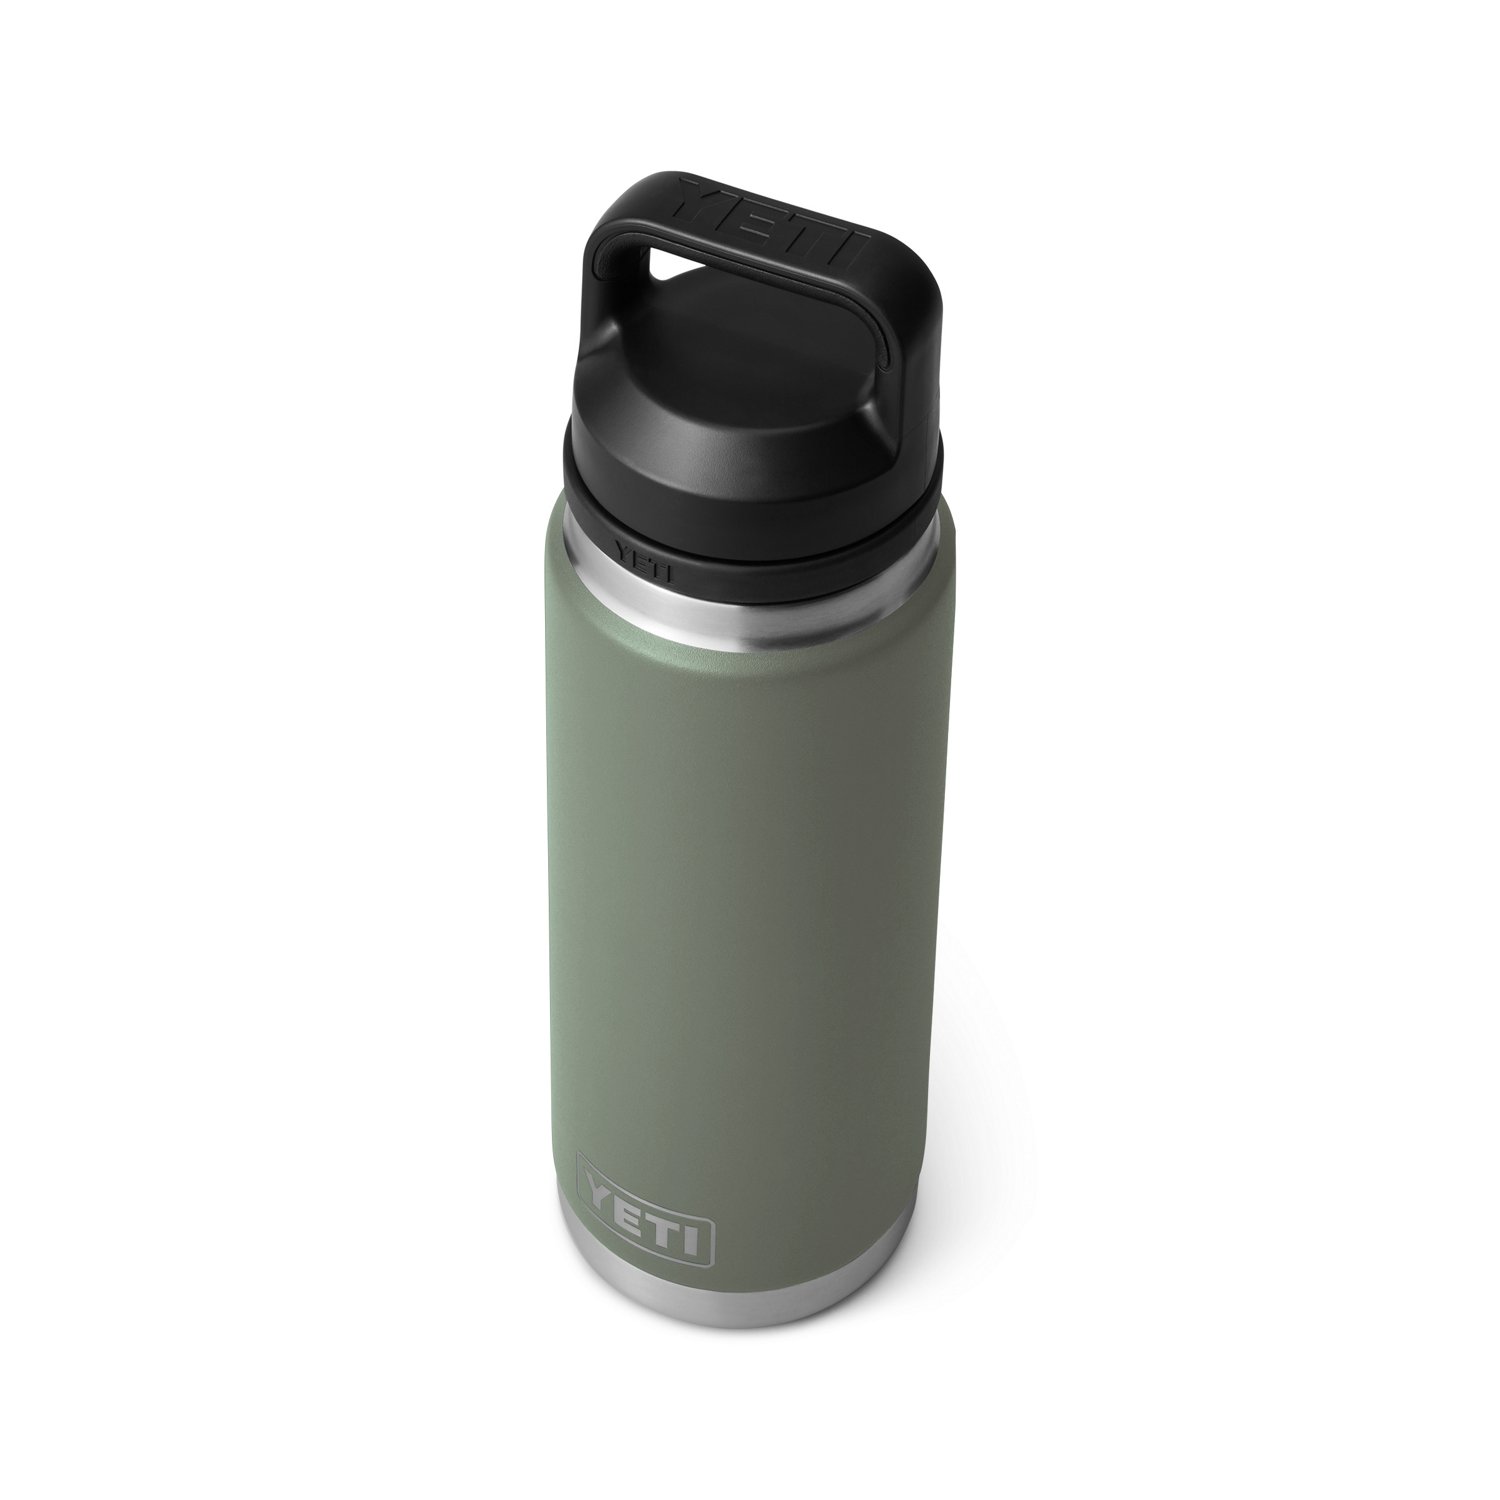 https://academy.scene7.com/is/image/academy//drinkware/yeti-rambler-26-oz-bottle-with-chug-cap-21071501698-green/c471e27c7c2e4cb3853c5ee6f539463f?$pdp-mobile-gallery-ng$